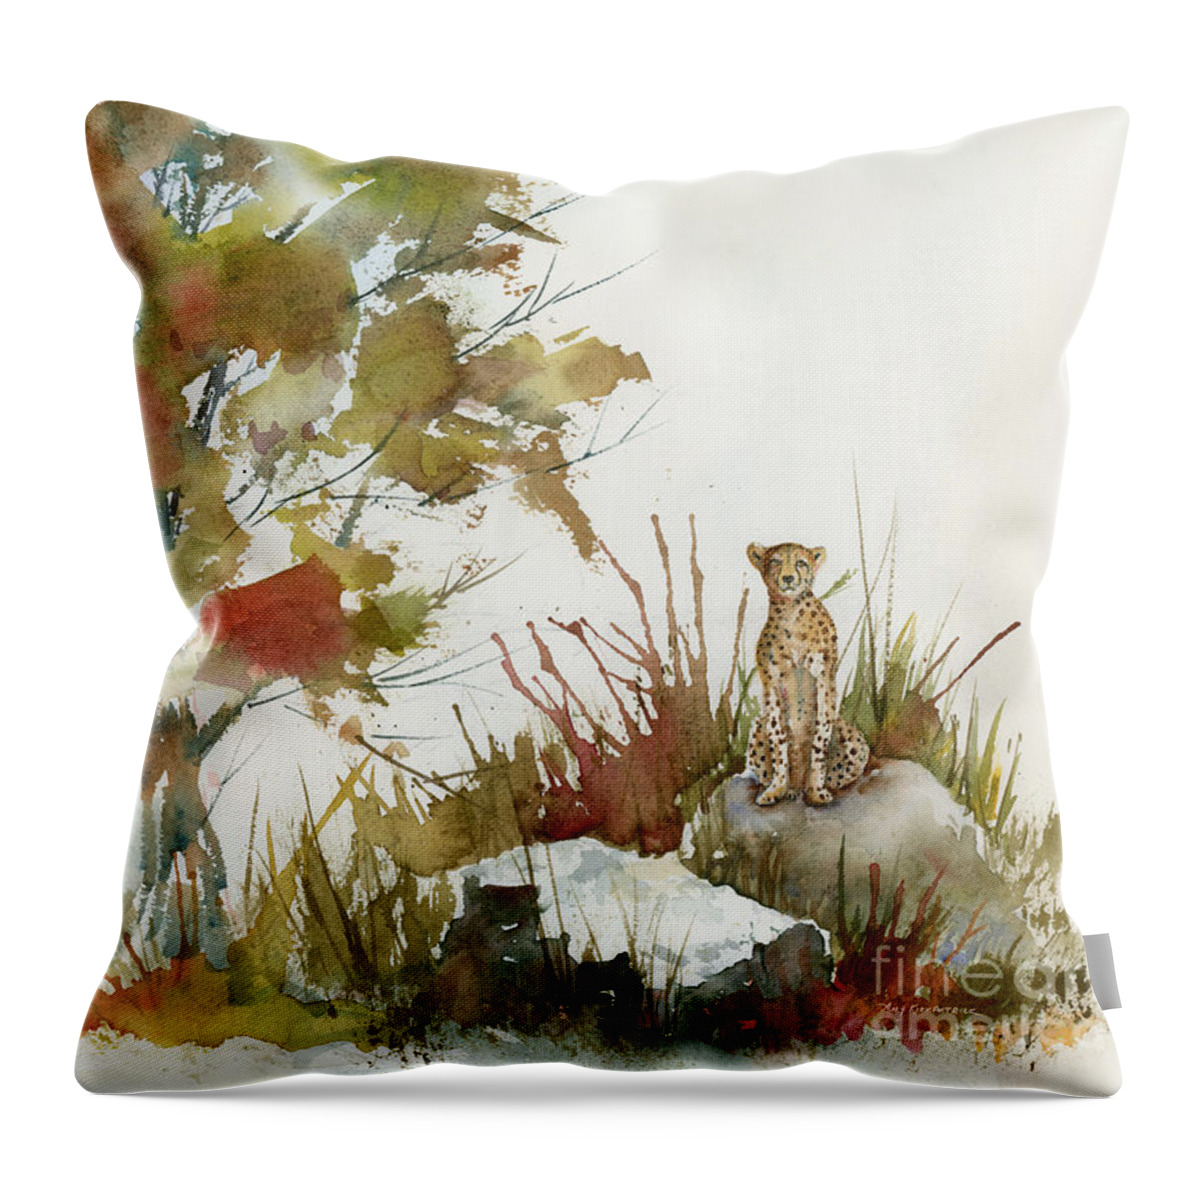 Cheetah Throw Pillow featuring the painting Quiet Watch by Amy Kirkpatrick